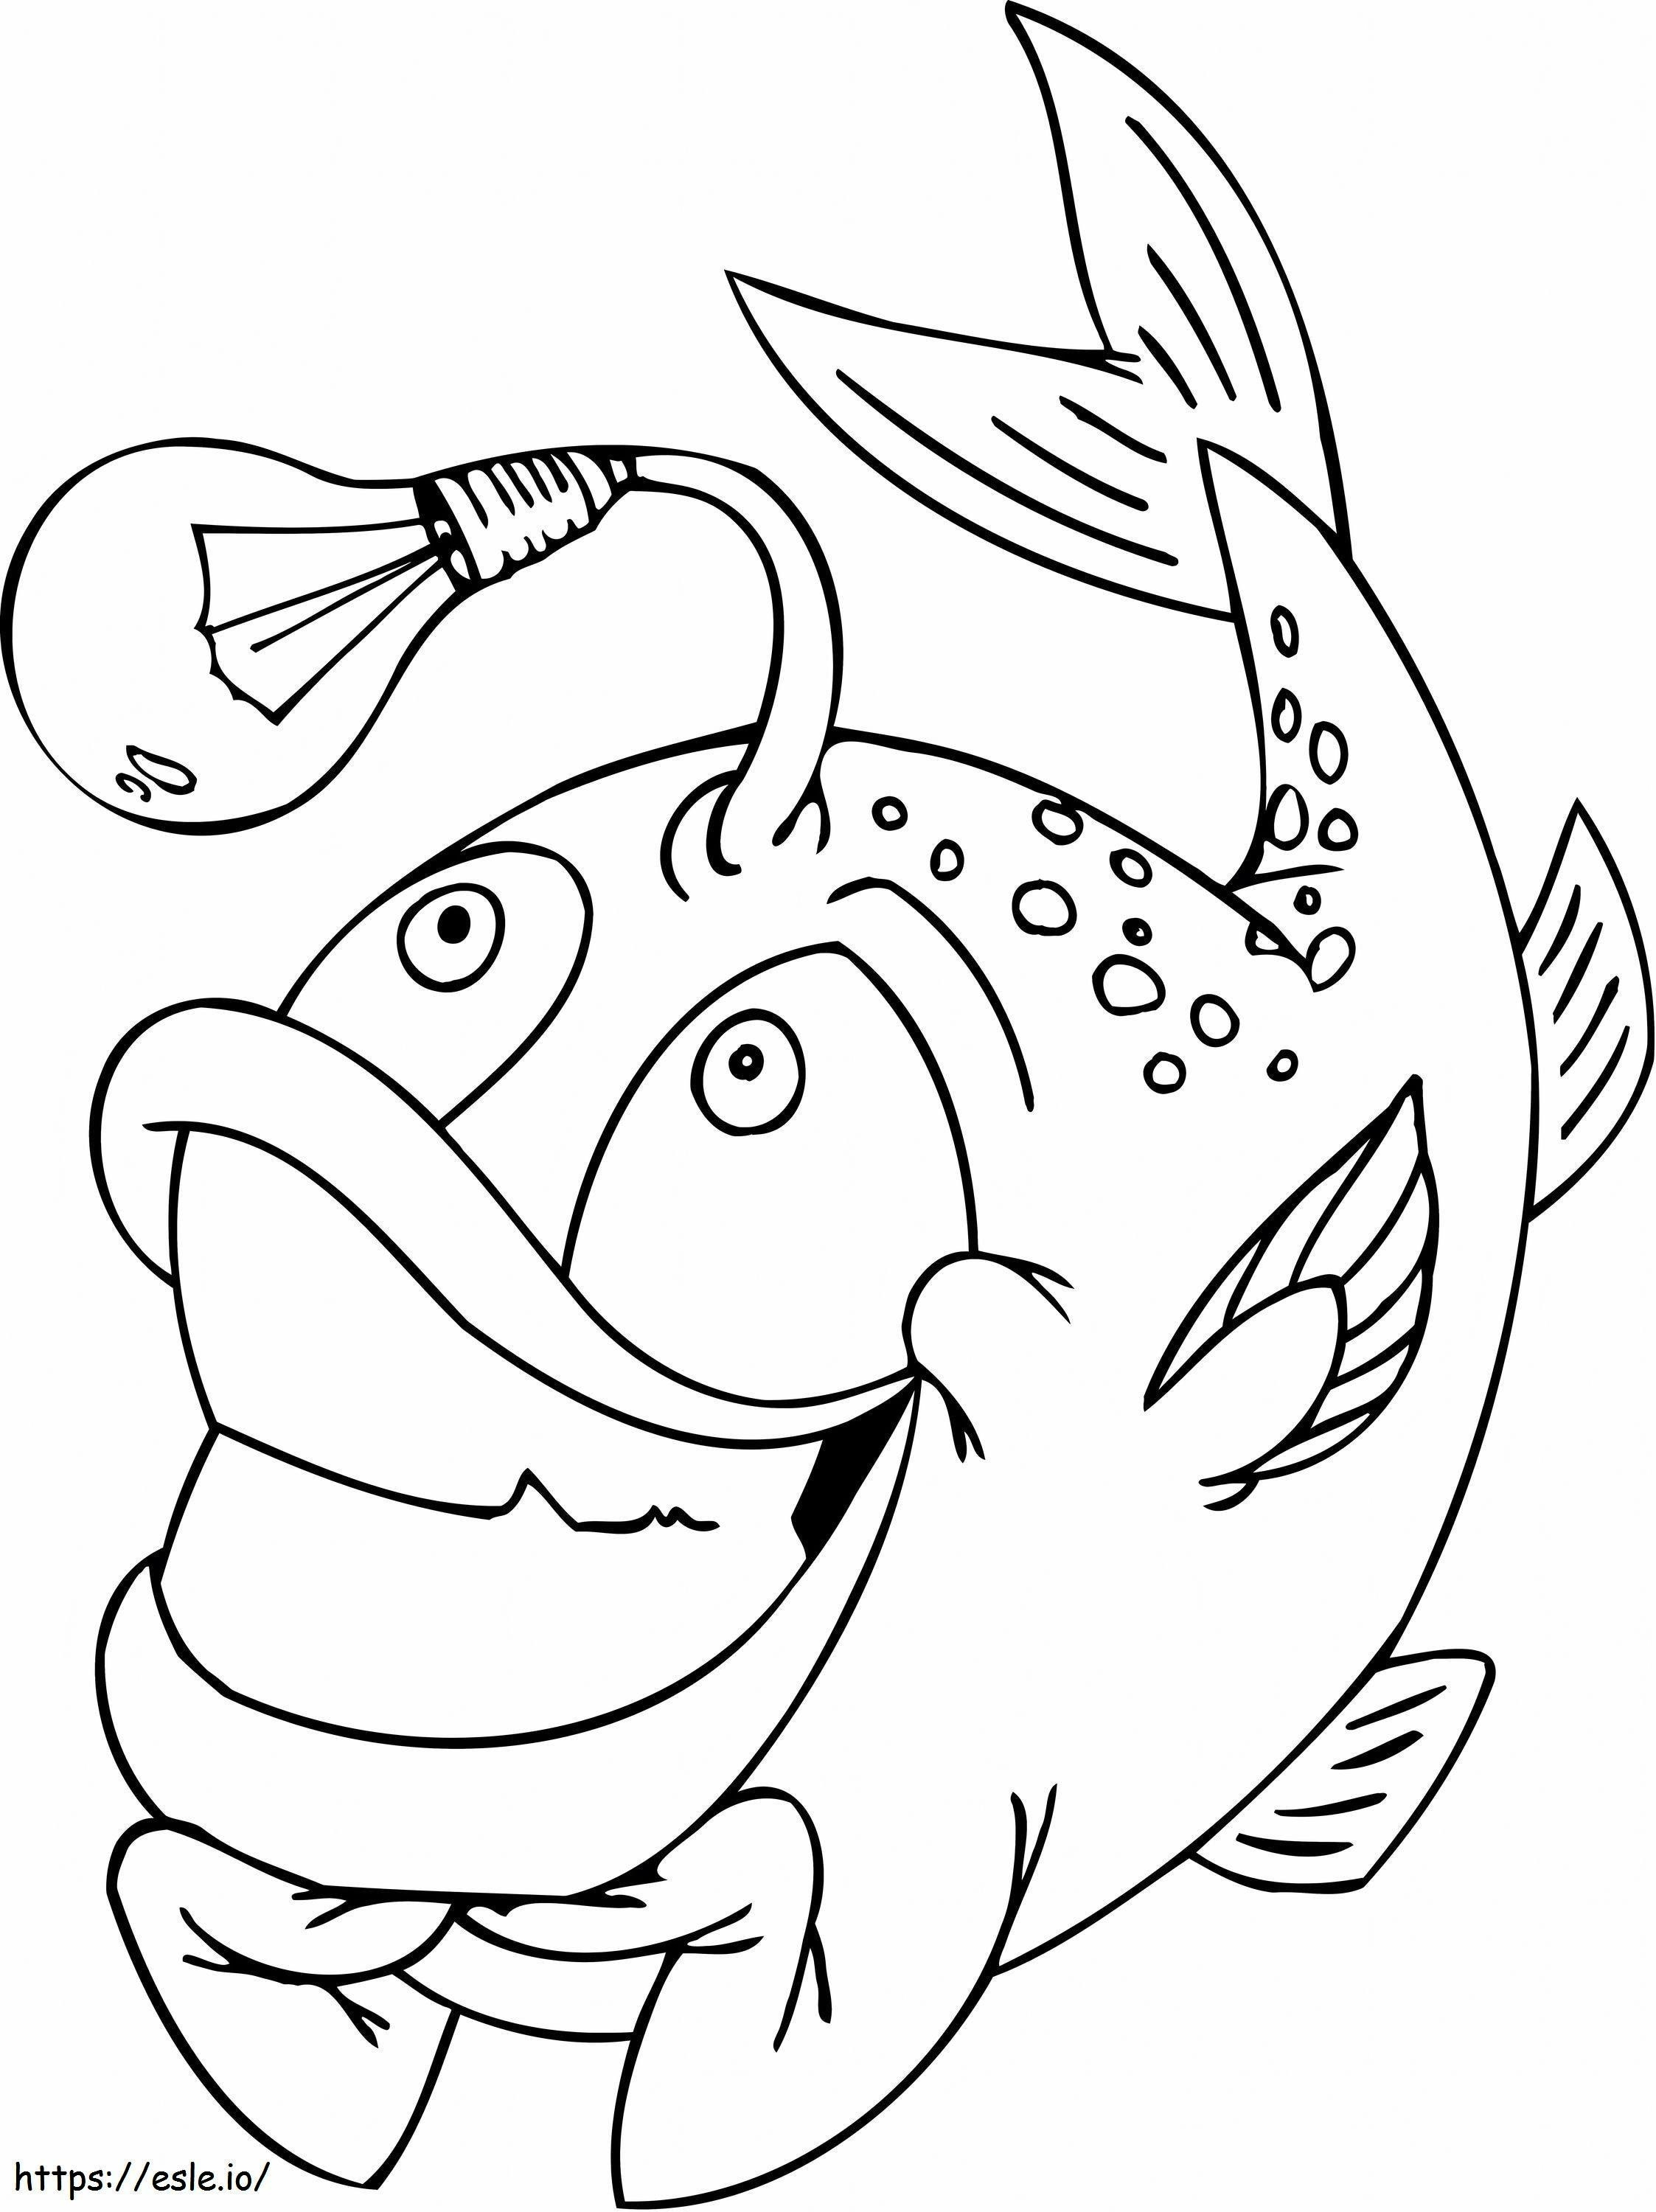 1545181971_Funny Fish Scaled coloring page